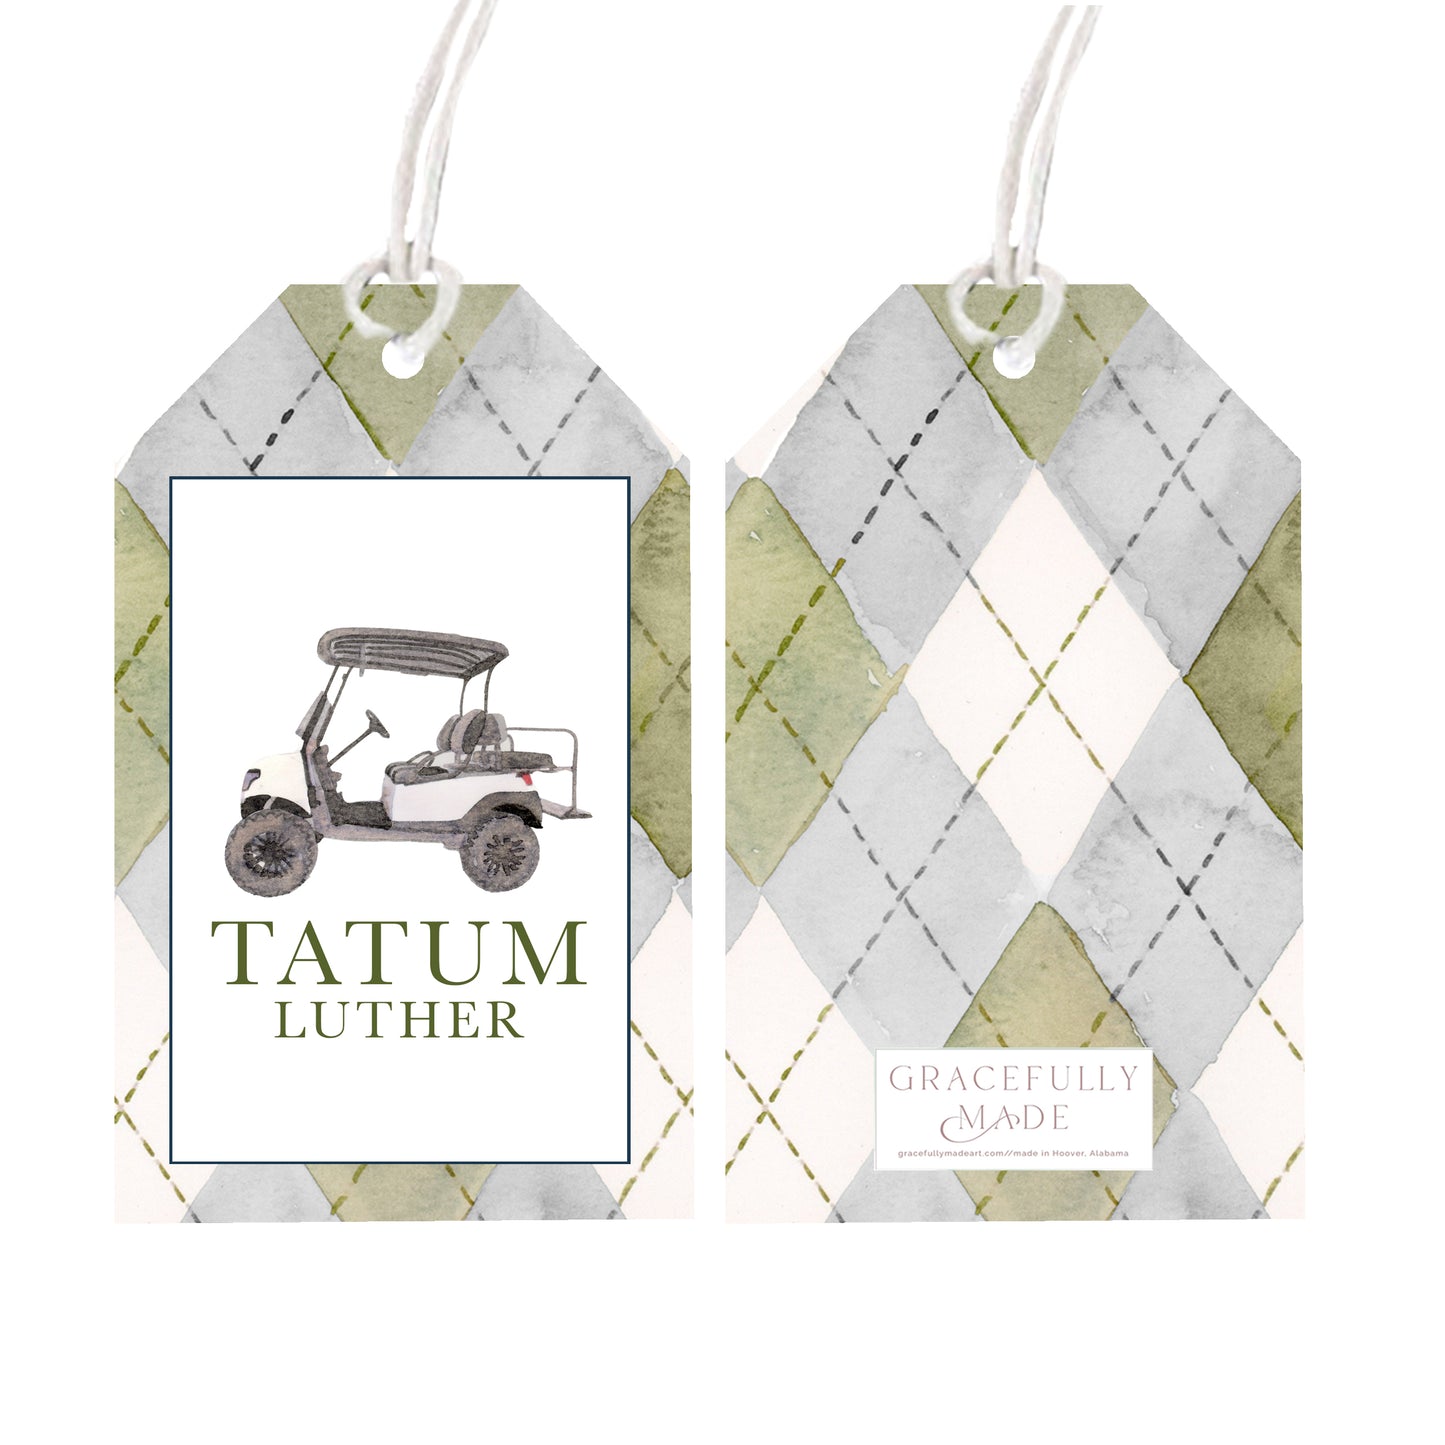 Personalized golf cart gift tags